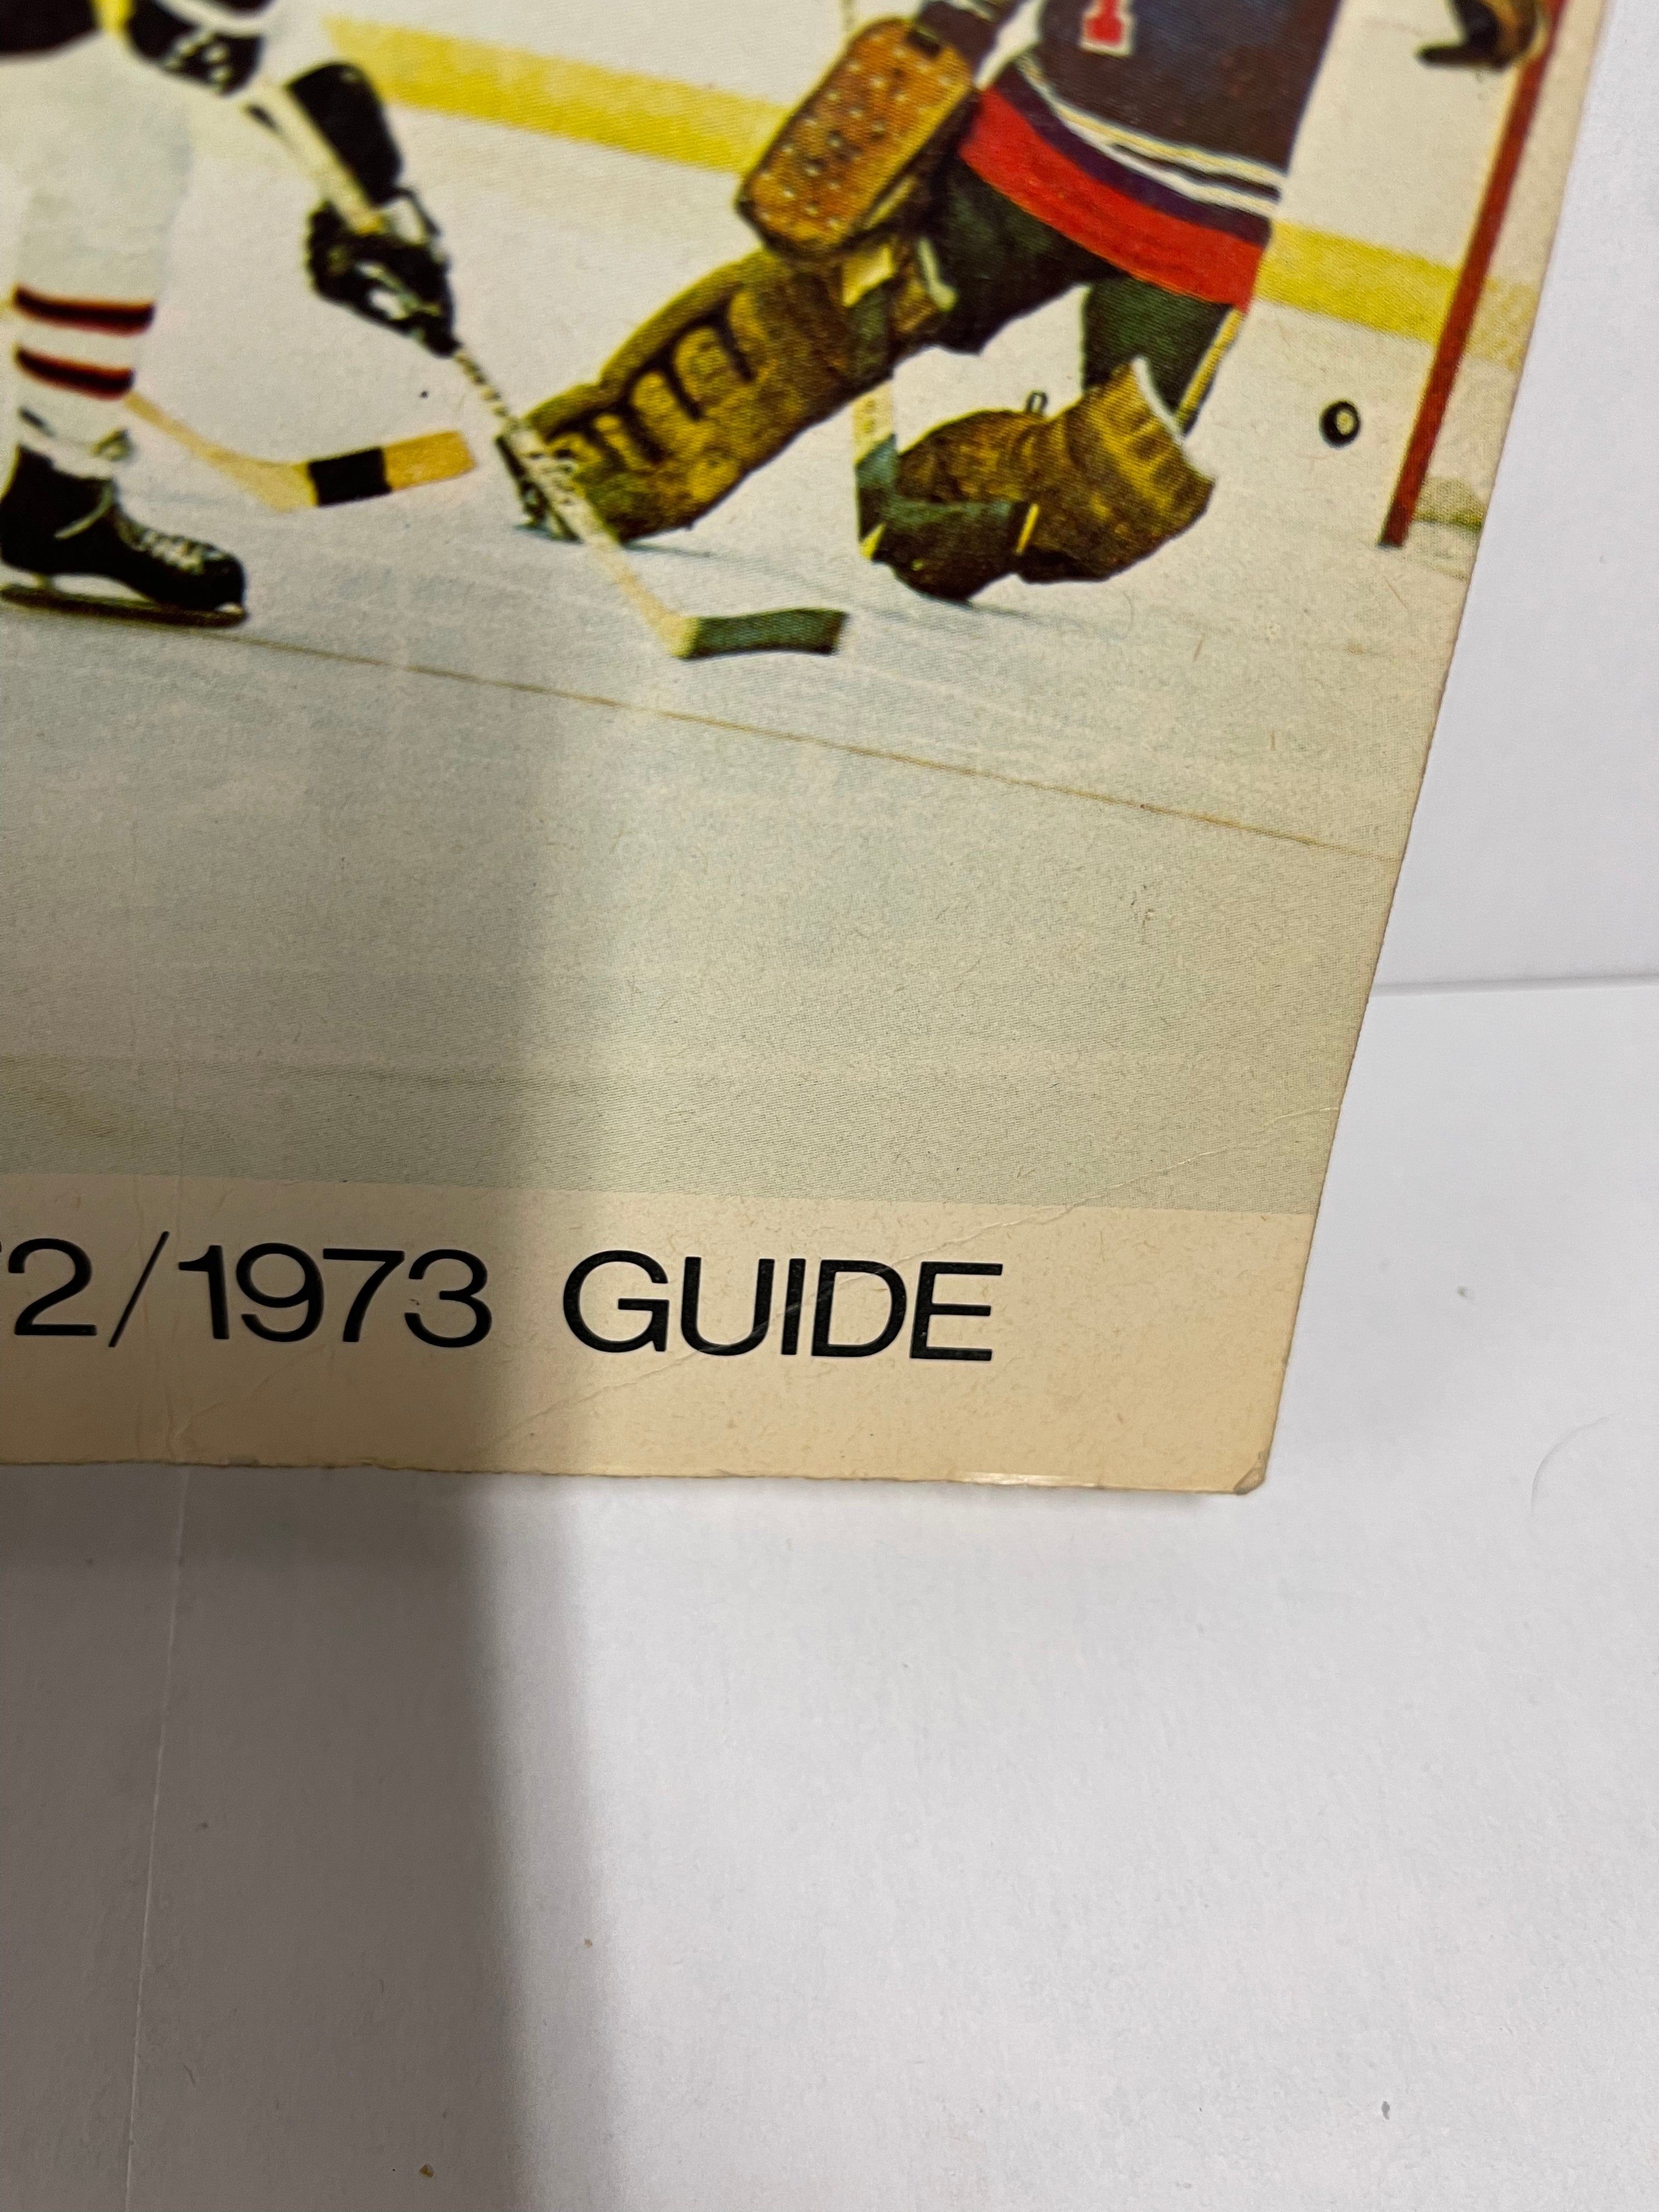 NHL Official stats hockey guide 1972-73